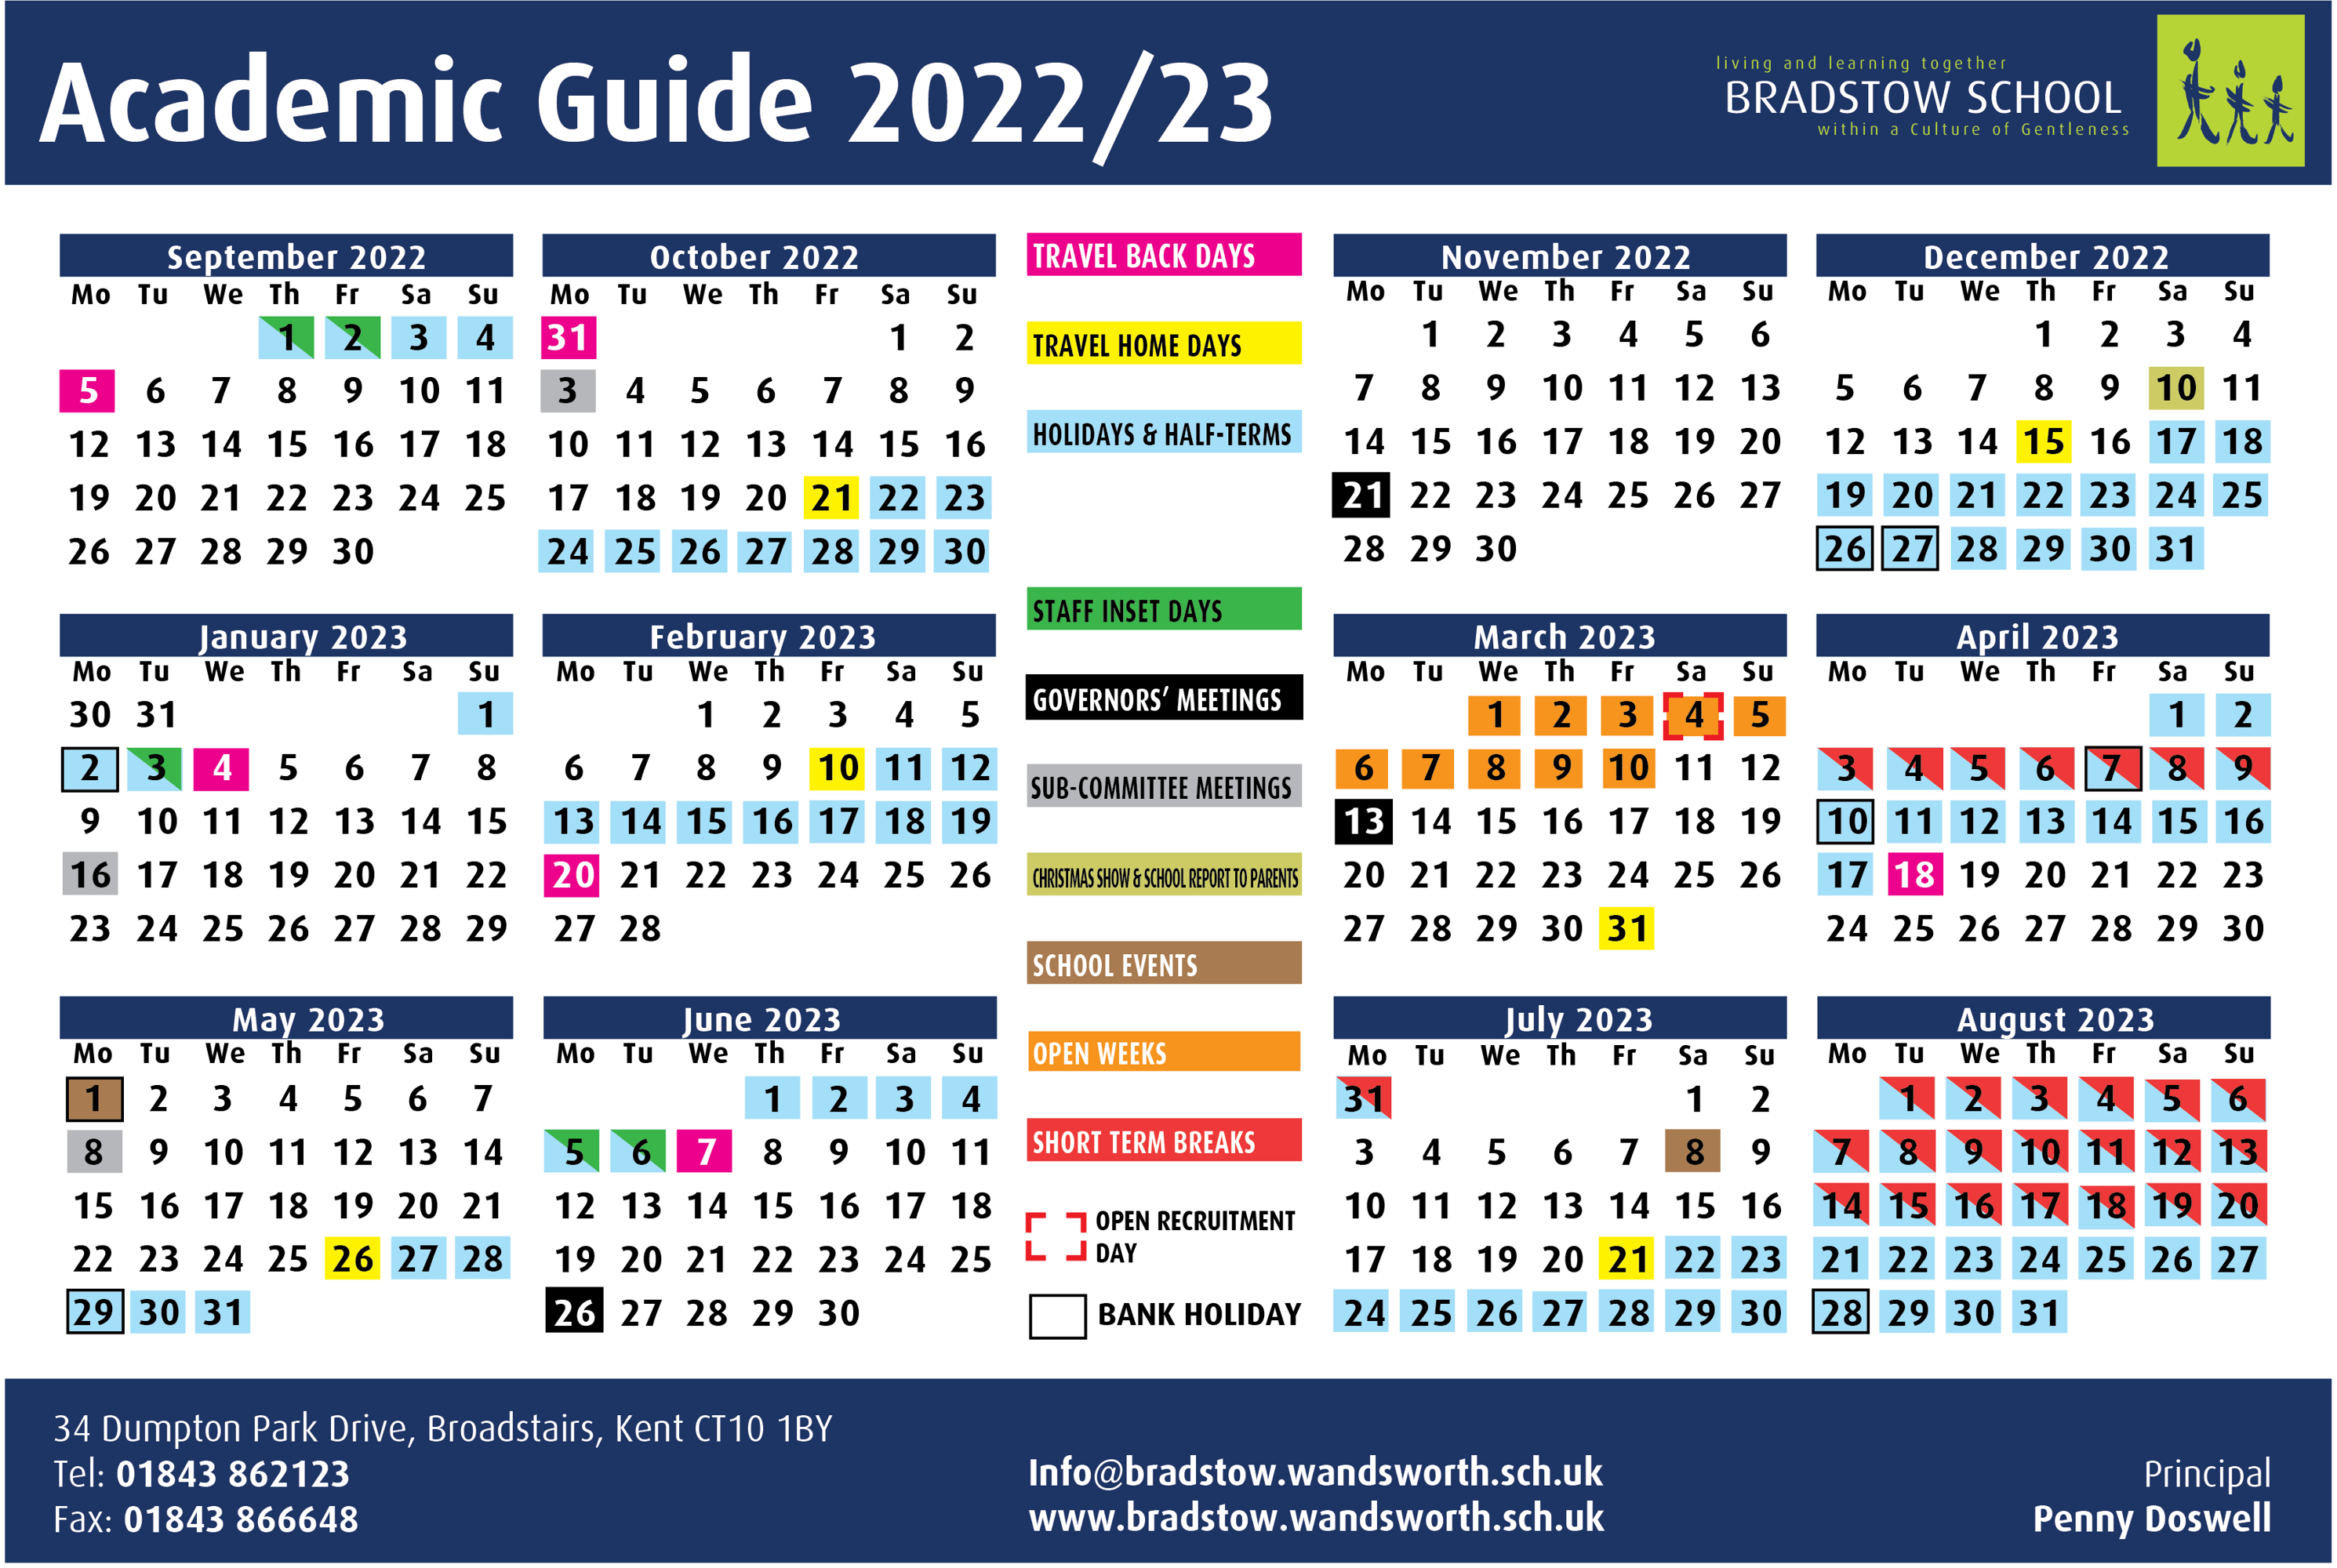 Calendar layout 2022 23 optional weekends removed christmas finish day change updated 13oct2022a